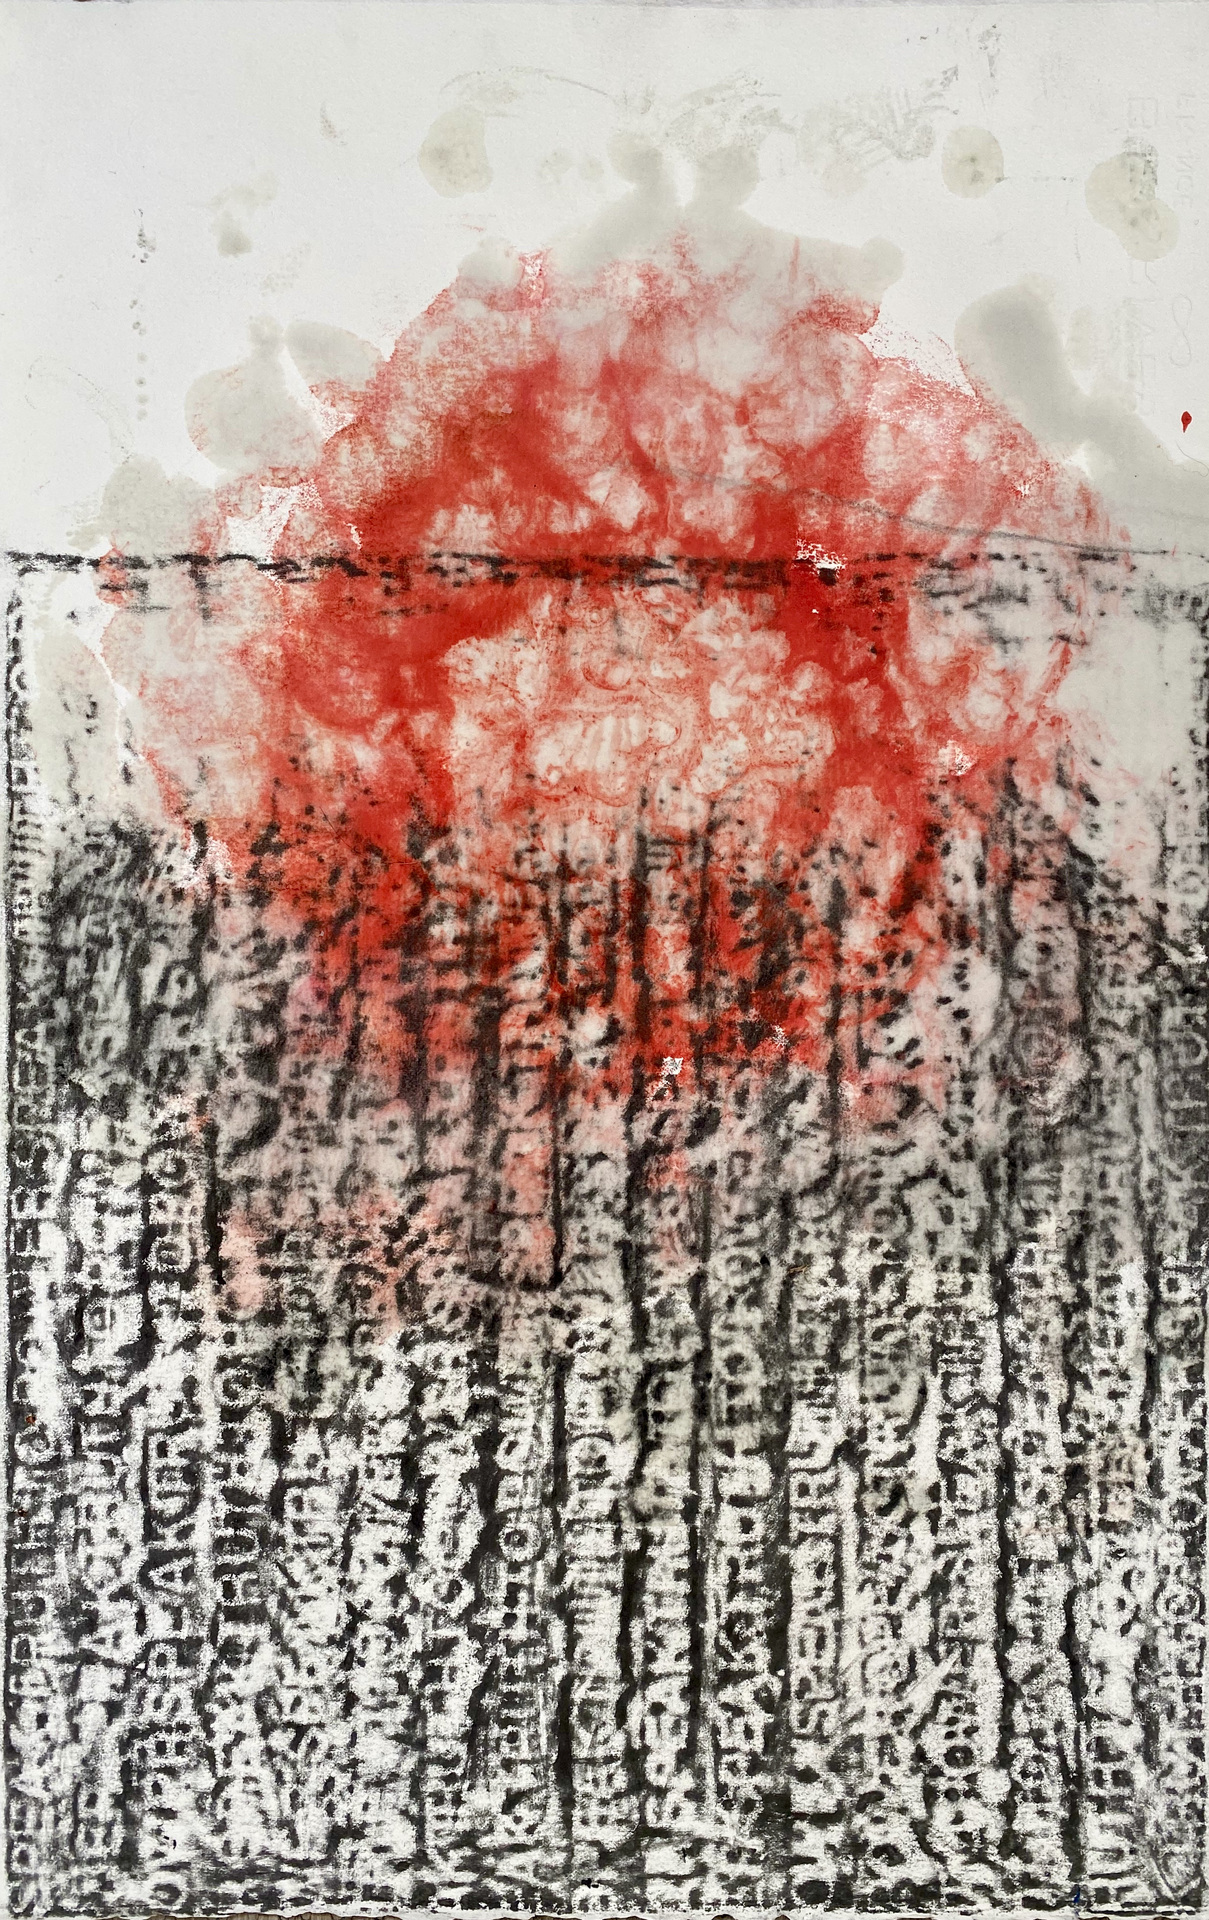 artwork has illegible, blocky text going up the page created a rocky-like texture. There is a red blotch in the middle of the artwork that looks similar to blood in water.